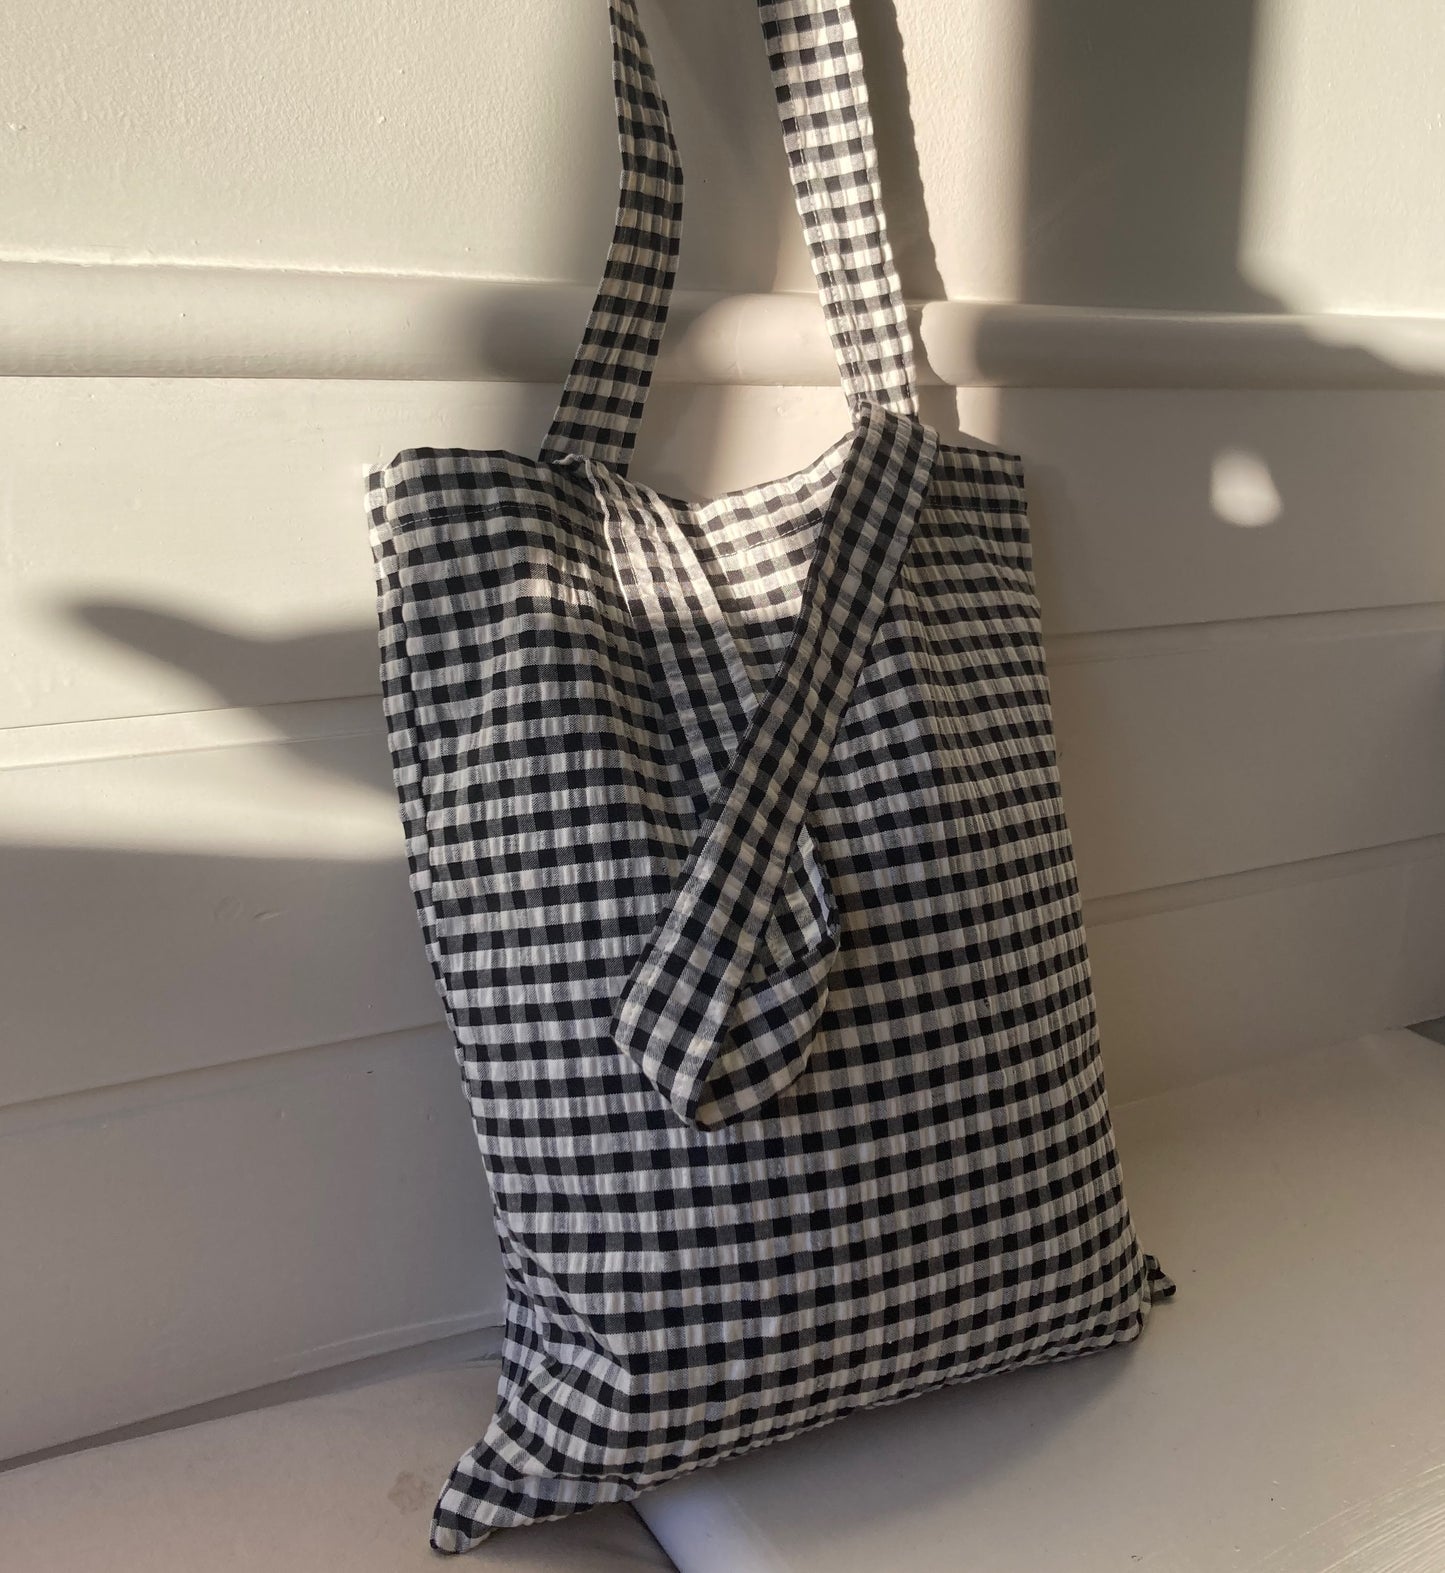 Noble Tote